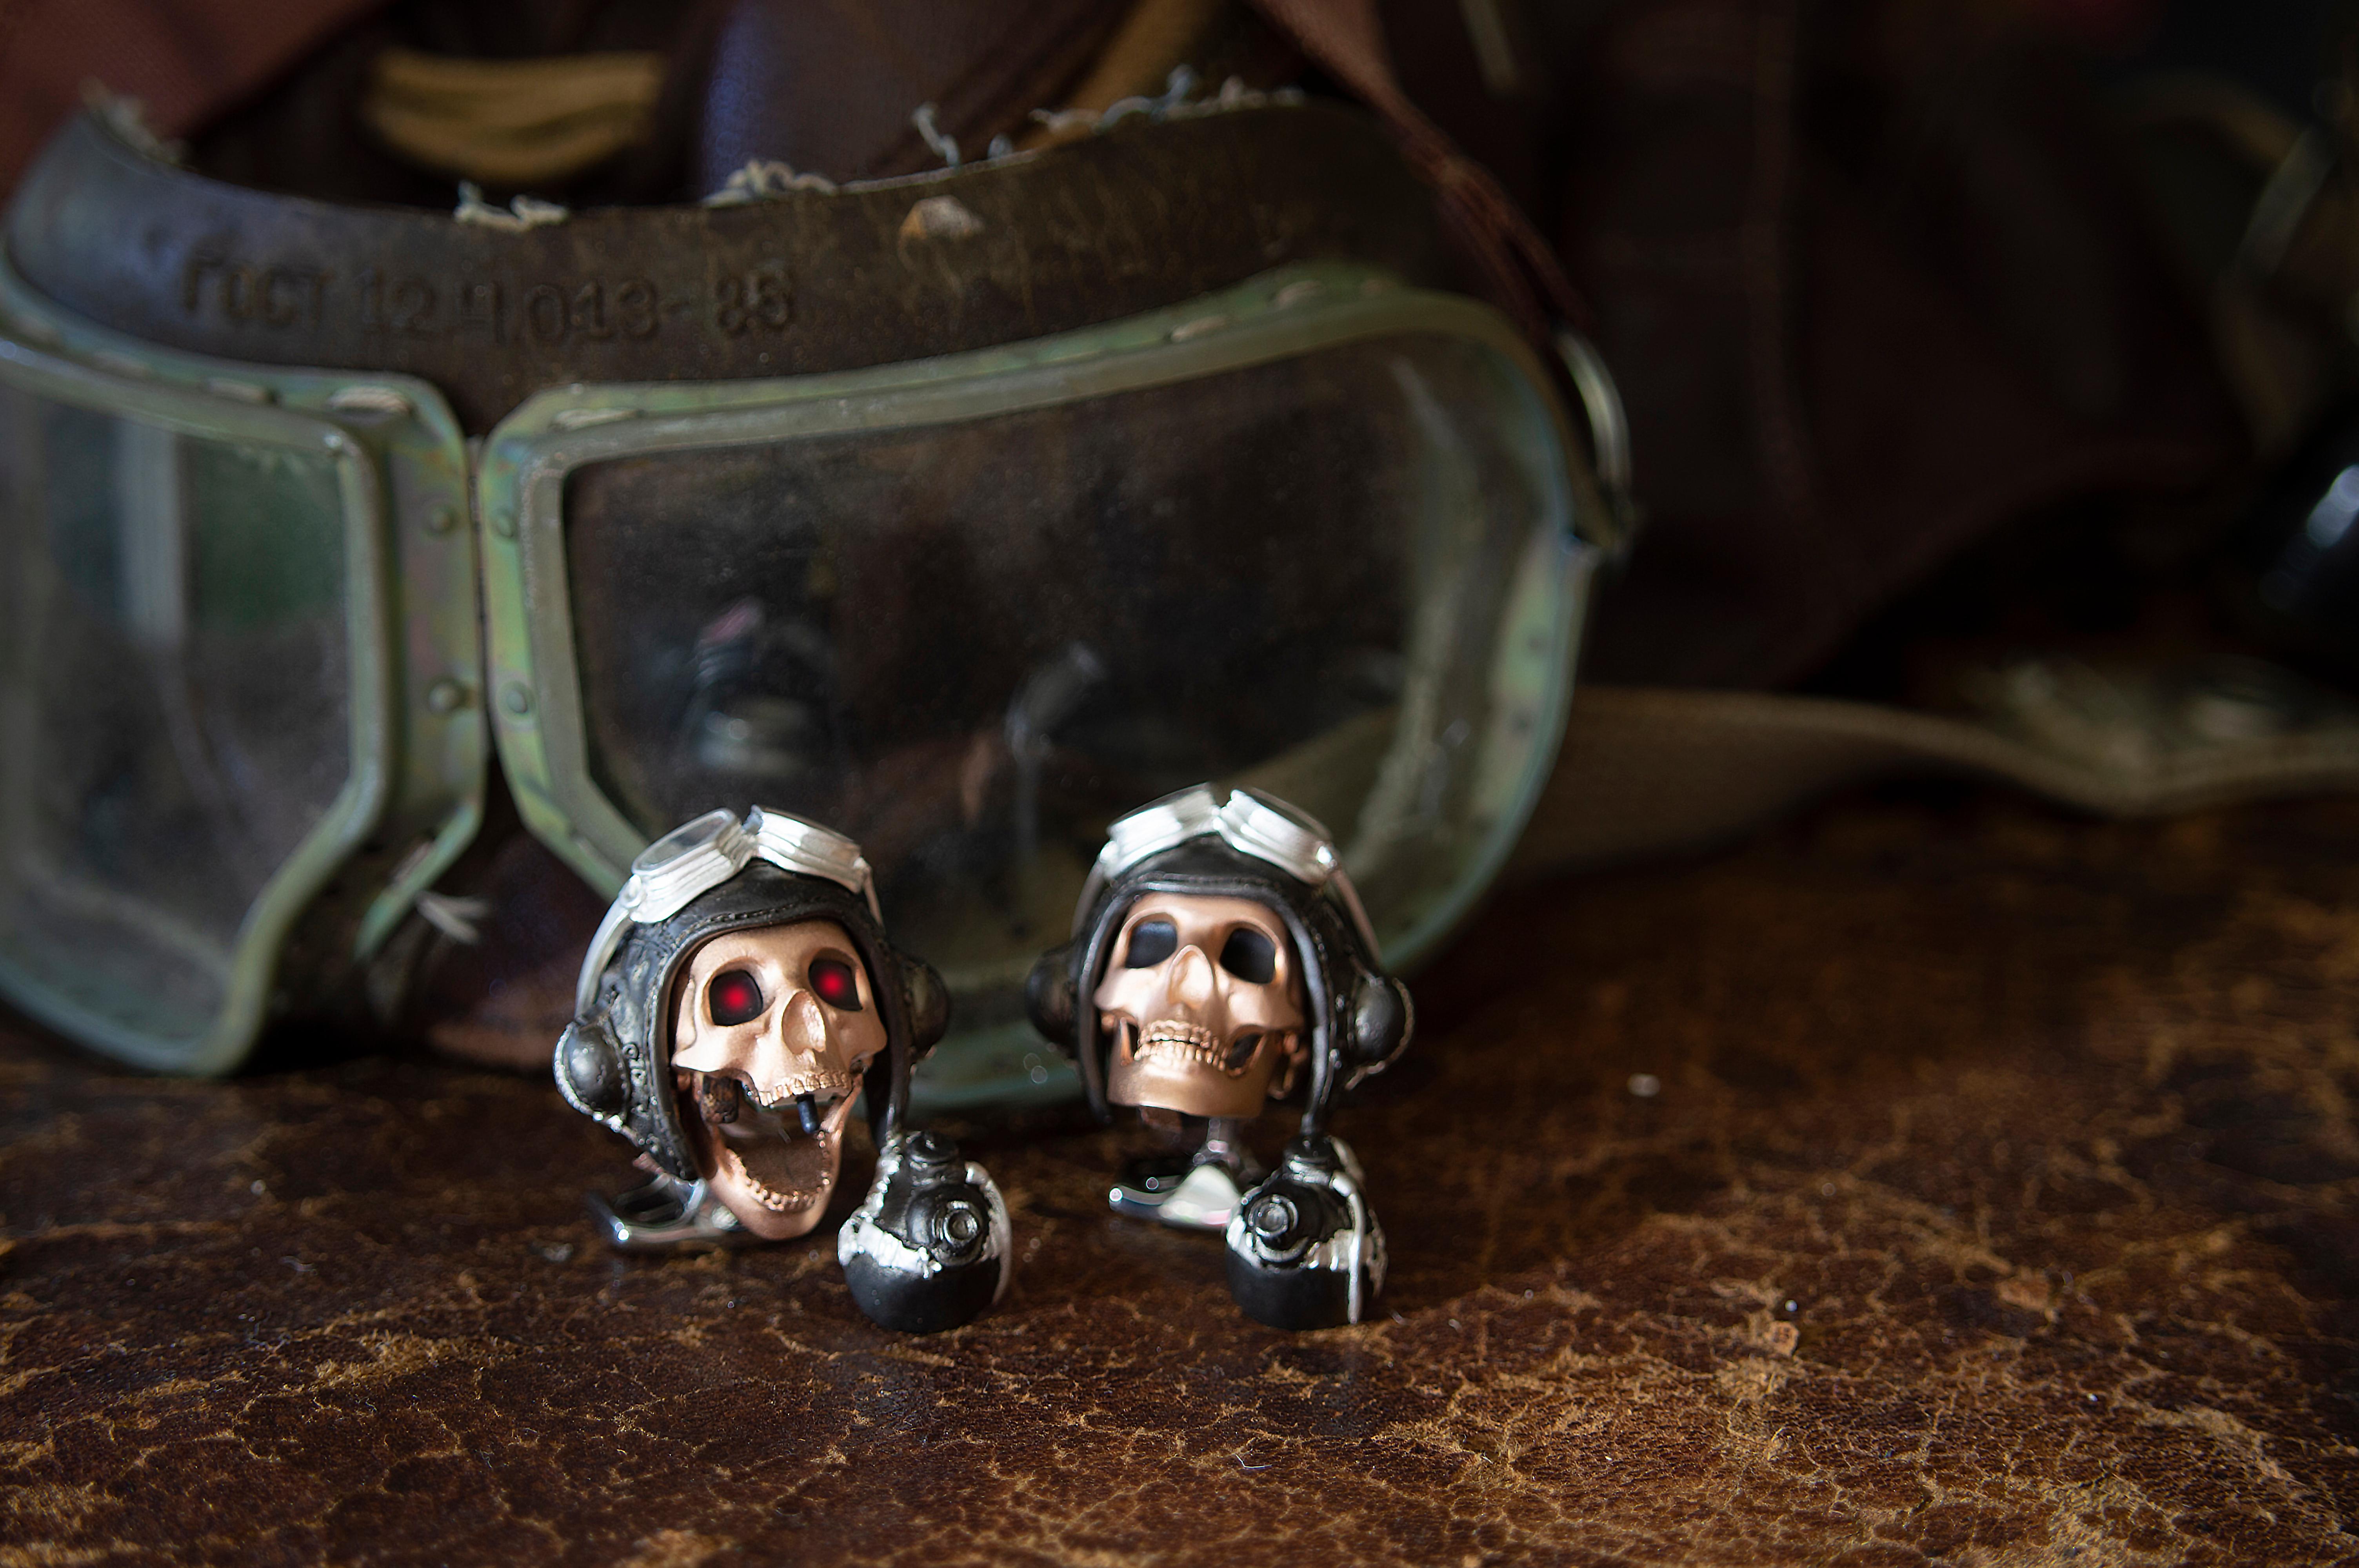 DEAKIN & FRANCIS, Piccadilly Arcade, London

Truly one of a kind, these unique LED Pilot Skull Cufflinks are sure to get heads turning!

Designed not only to commemorate the centennial of the First World War, but also to mark the remarkable efforts